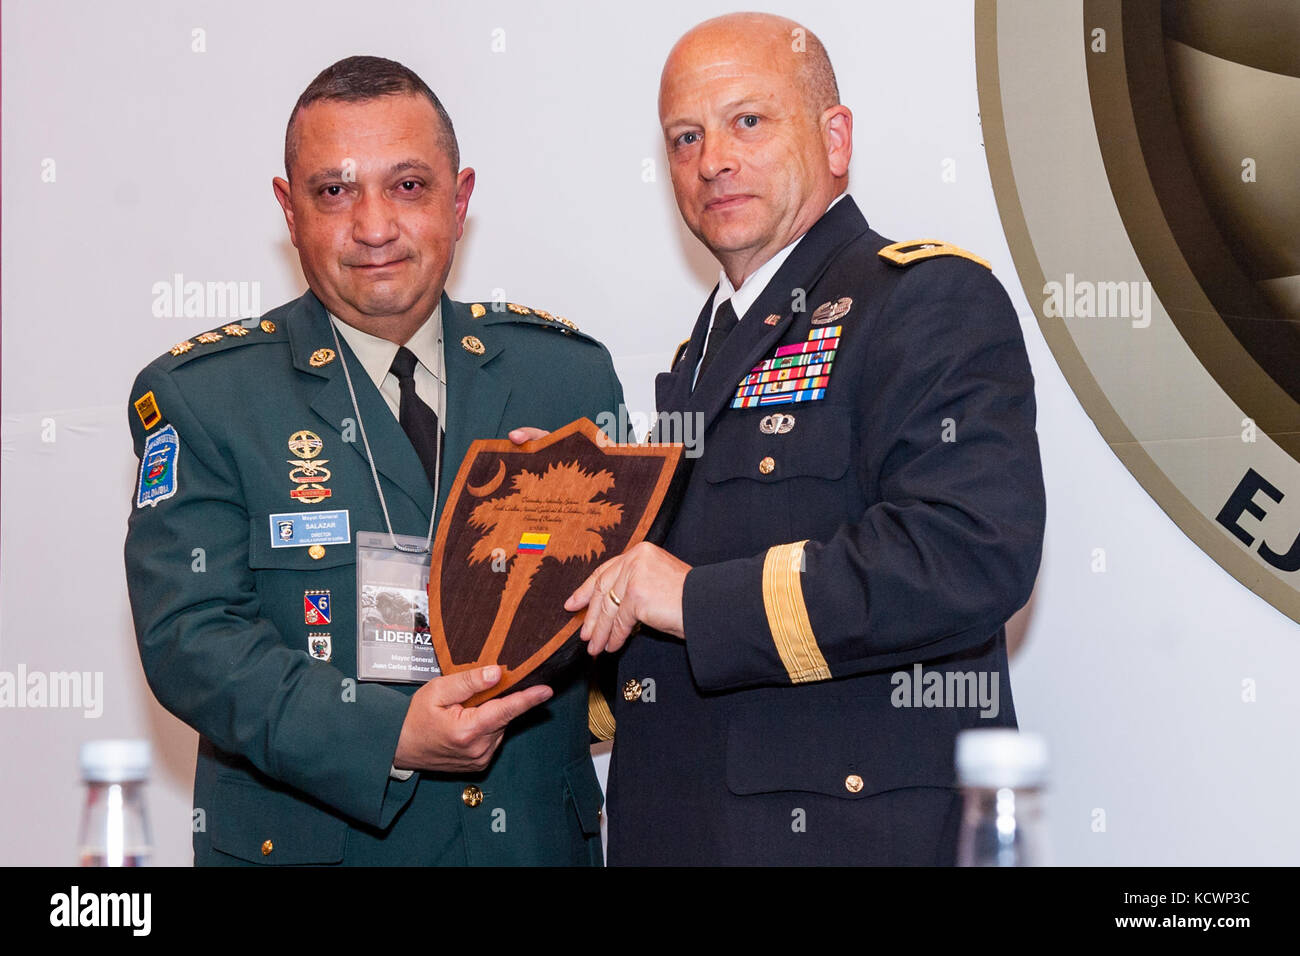 U.S. Army Maj. Gen. Robert E. Livingston, Jr., the adjutant general for South Carolina, presents Colombian Army Mayor General Juan Carlos Salazar with the palmetto shield as a token of appreciation at the Transformation Symposium, Bogota, Colombia, Aug. 5, 2016. (Photo by Sgt. Brian Calhoun, 108th Public Affairs Det.) Stock Photo